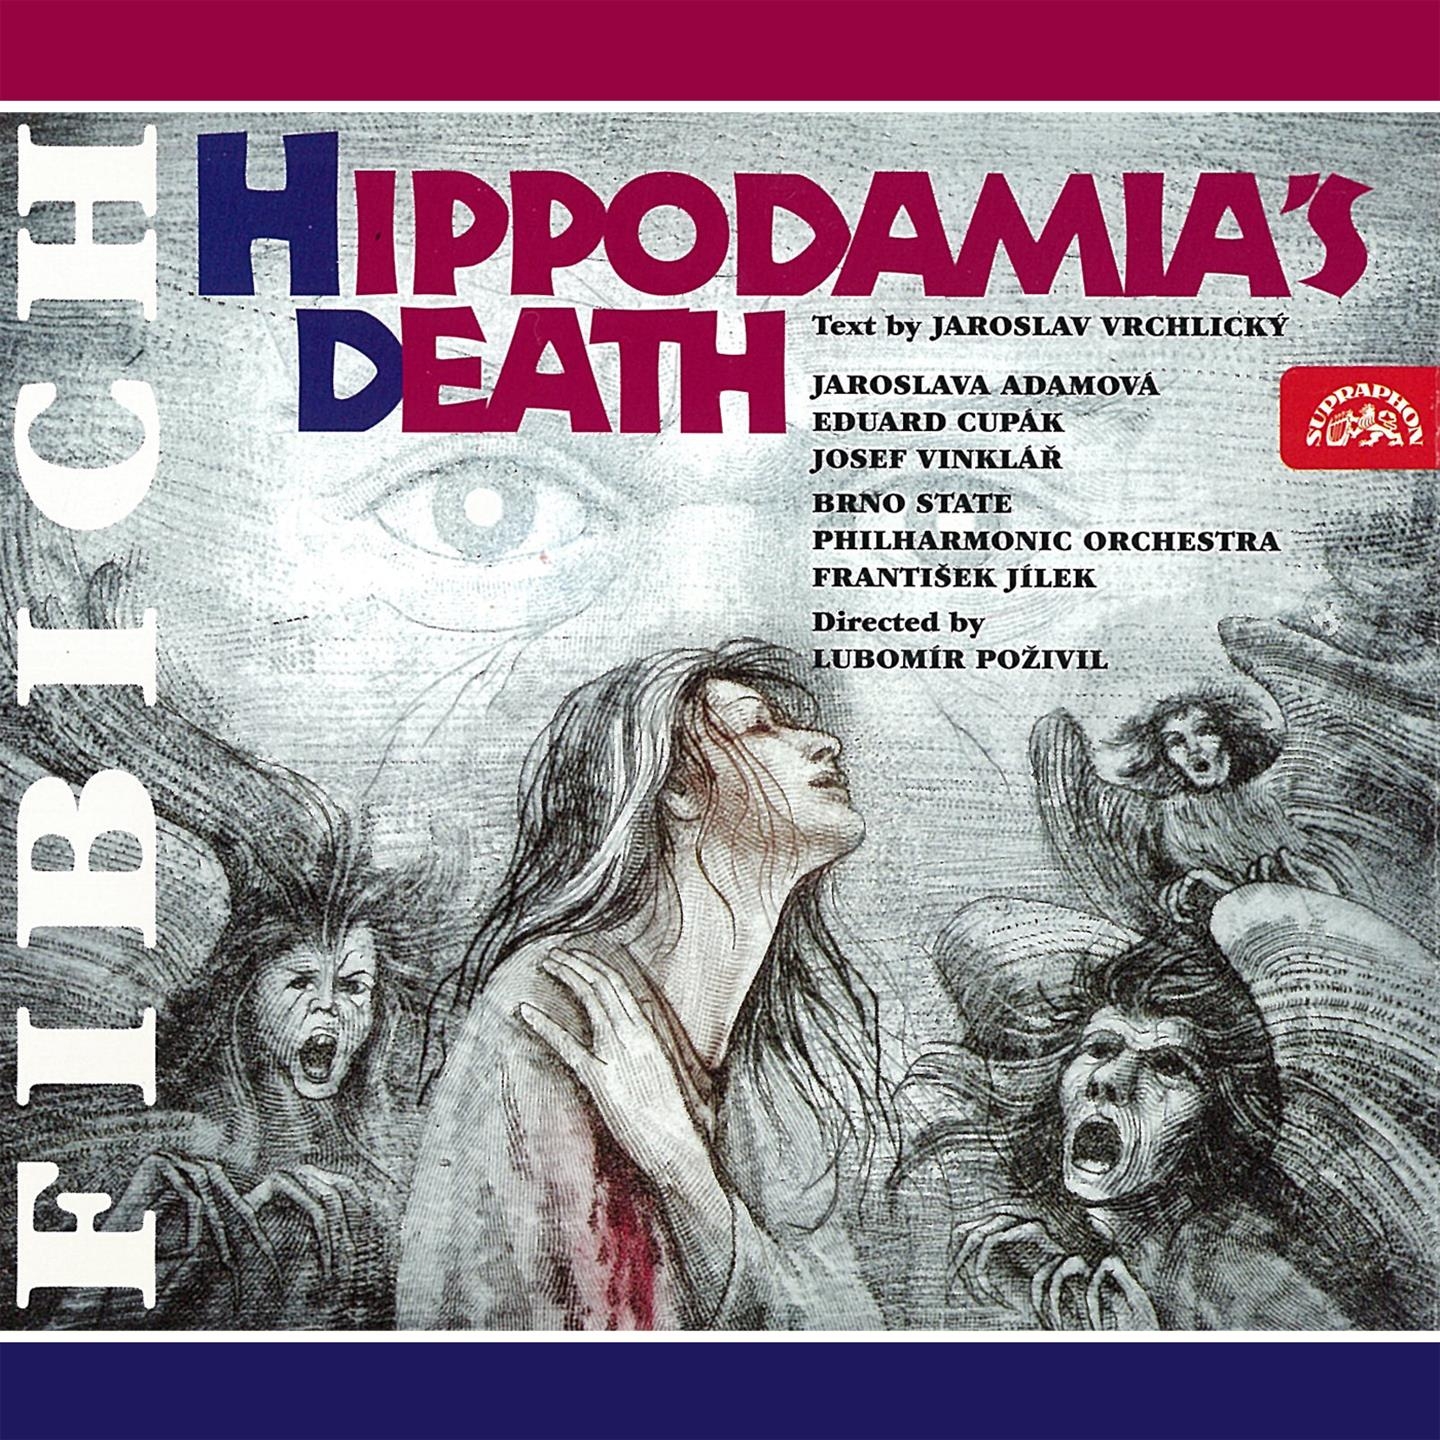 Hippodamia s Death, Op. 33, .: Act 3  Scene Four: So, your first quarrel?